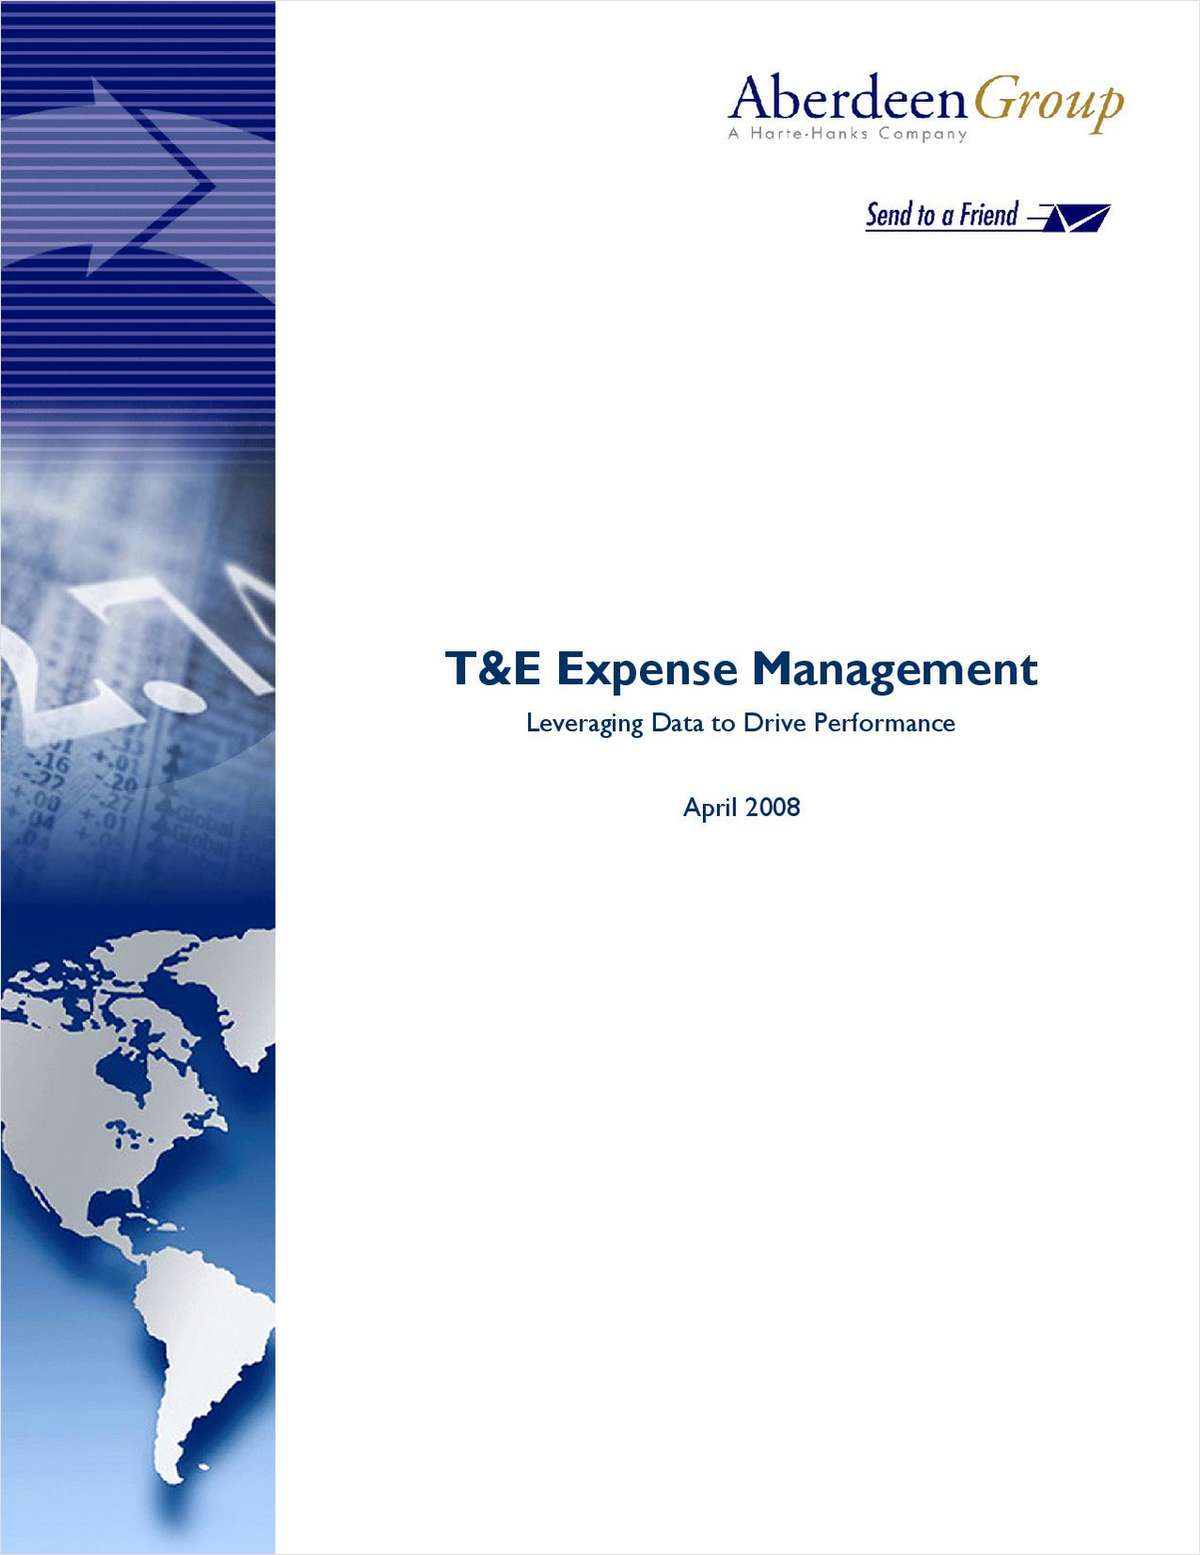 T&E Expense Management: Leveraging Data to Drive Performance